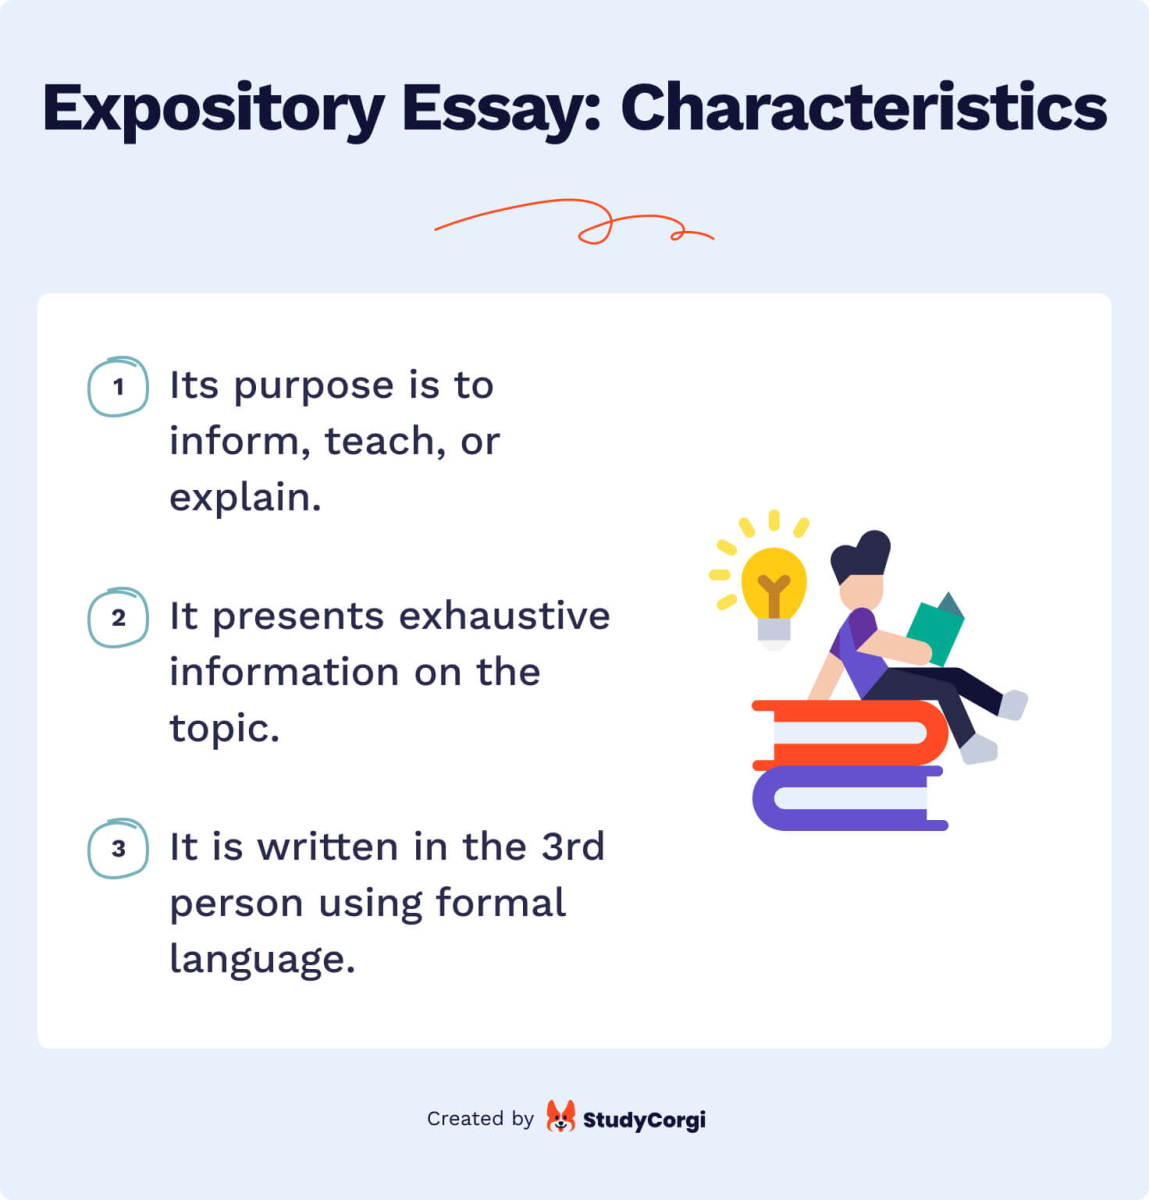 This image shows the characteristics of an expository essay.